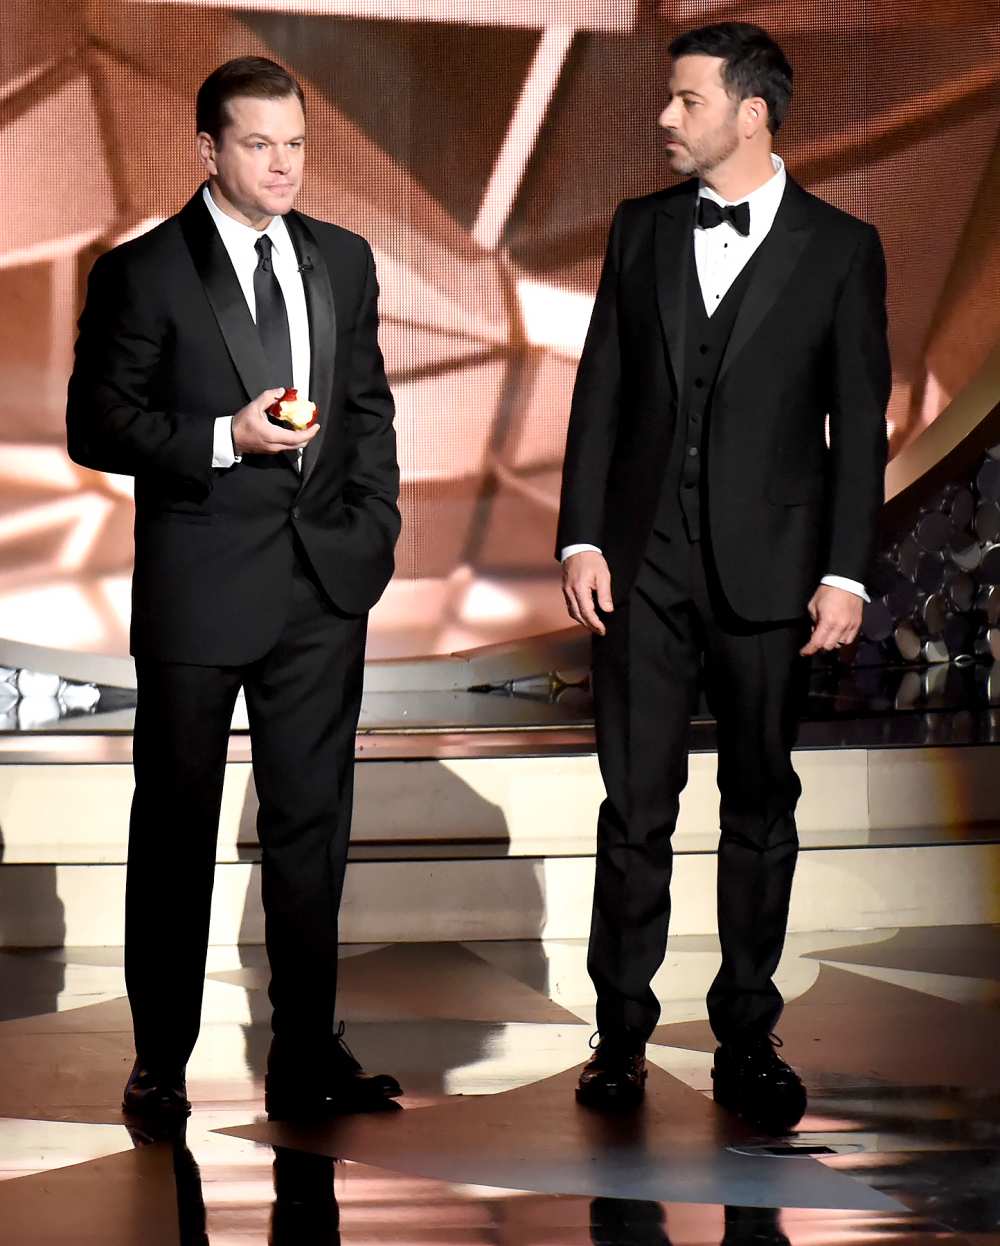 Matt Damon and Jimmy Kimmel speak onstage during the 68th Annual Primetime Emmy Awards at Microsoft Theater on September 18, 2016 in Los Angeles.